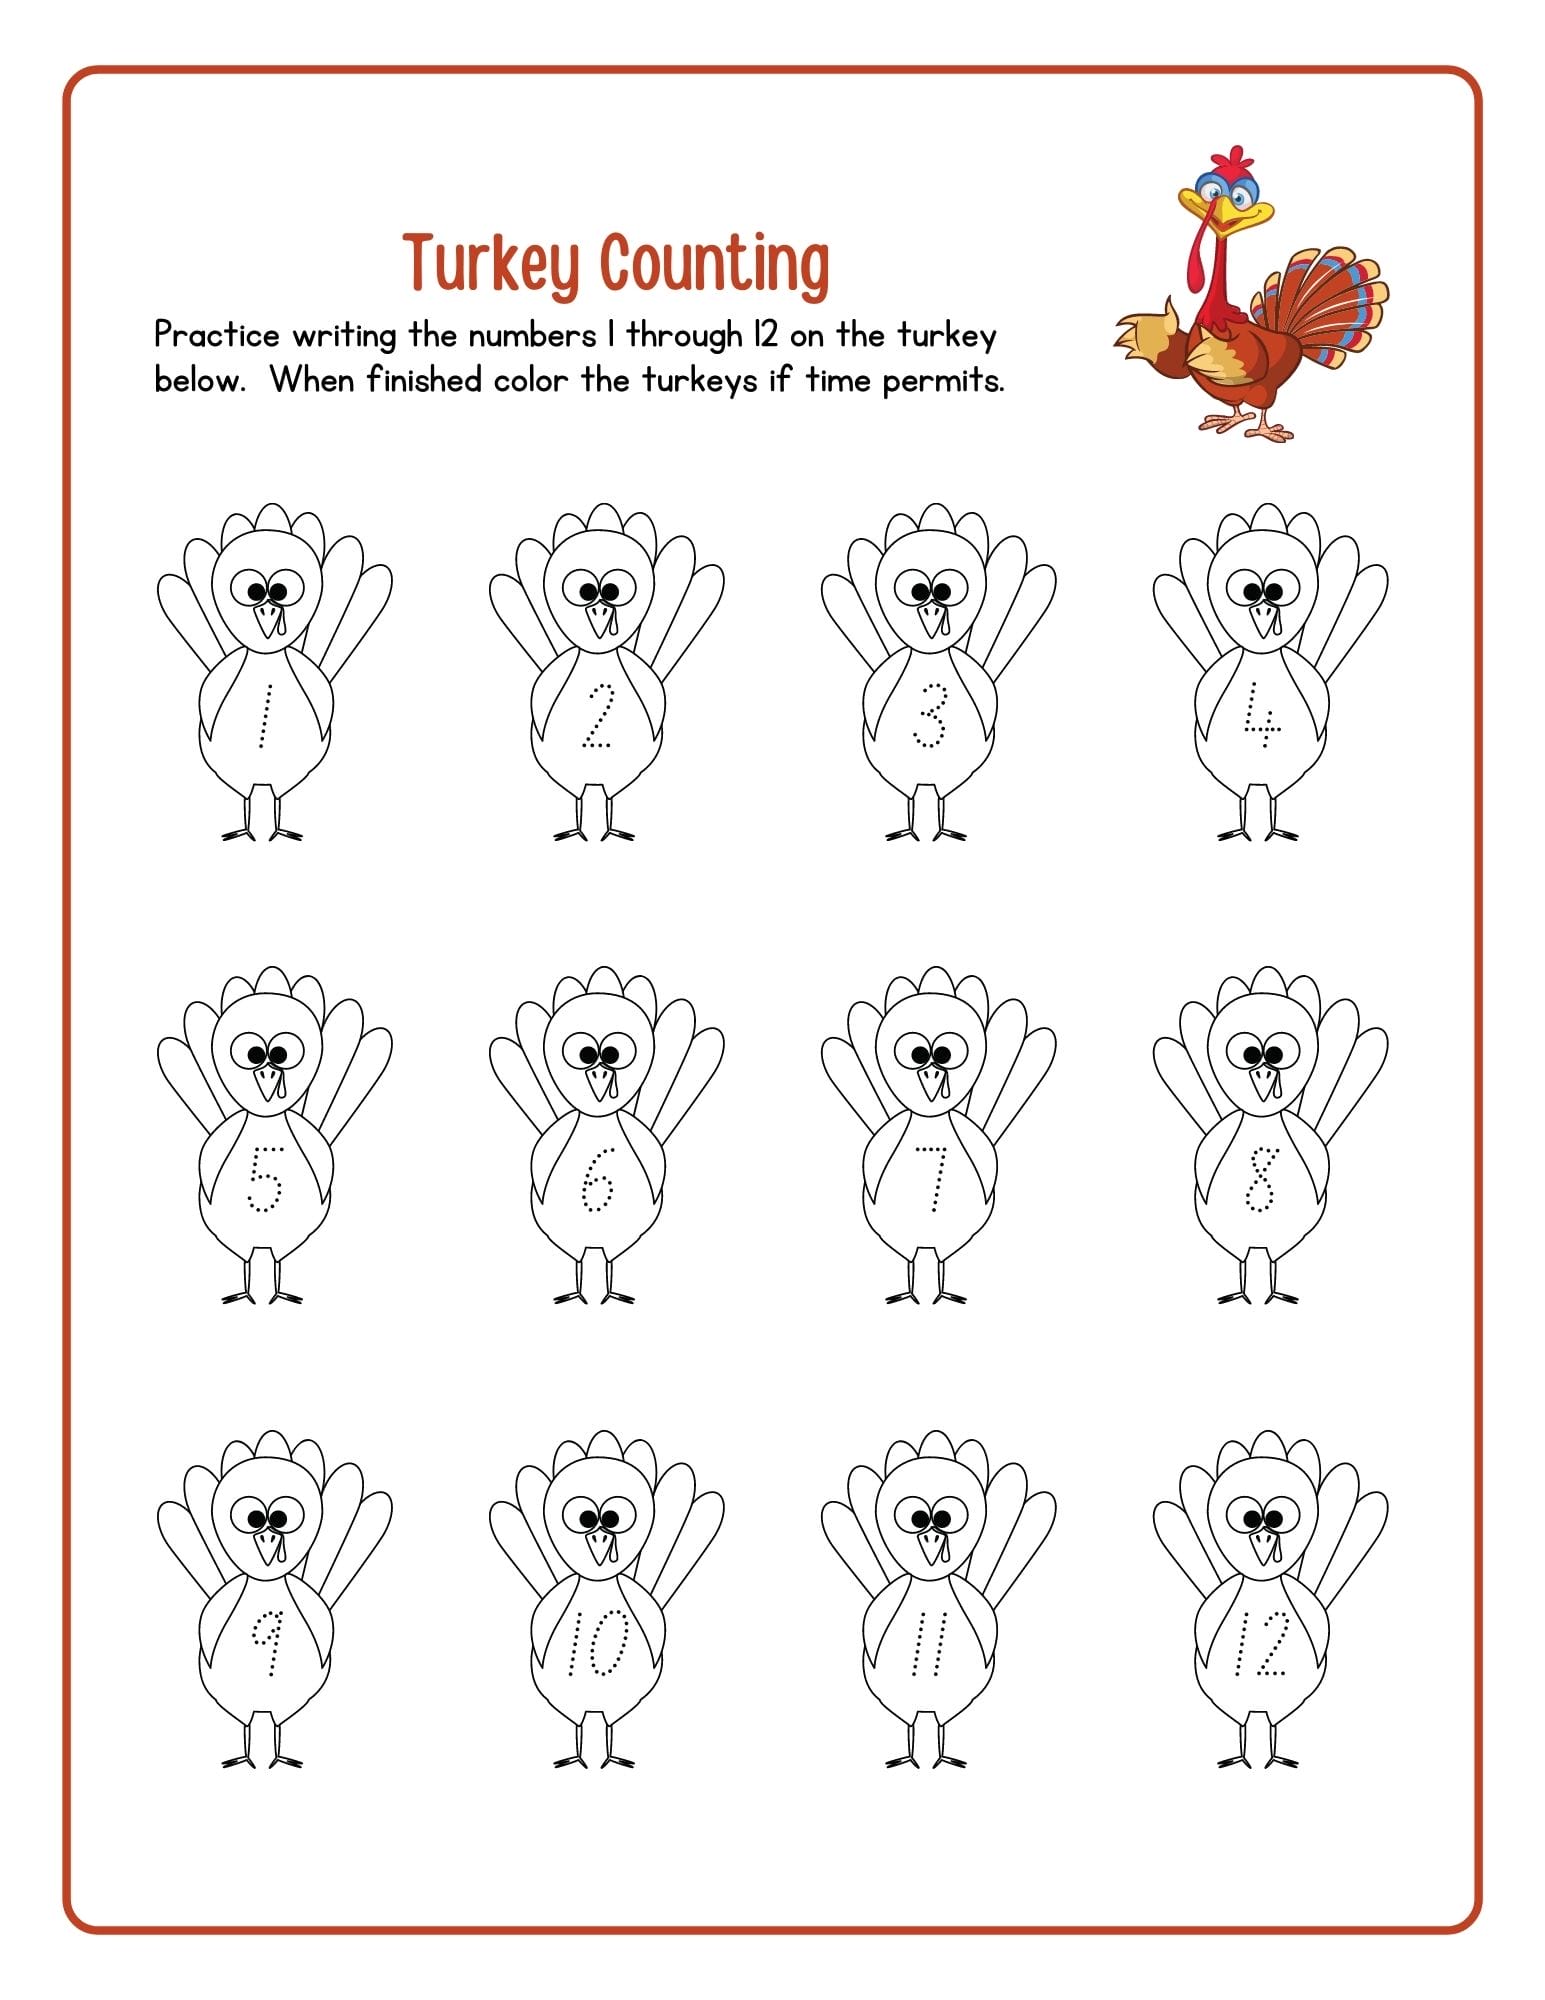 Thanksgiving Coloring Page and Activity - Turkey Counting and Coloring